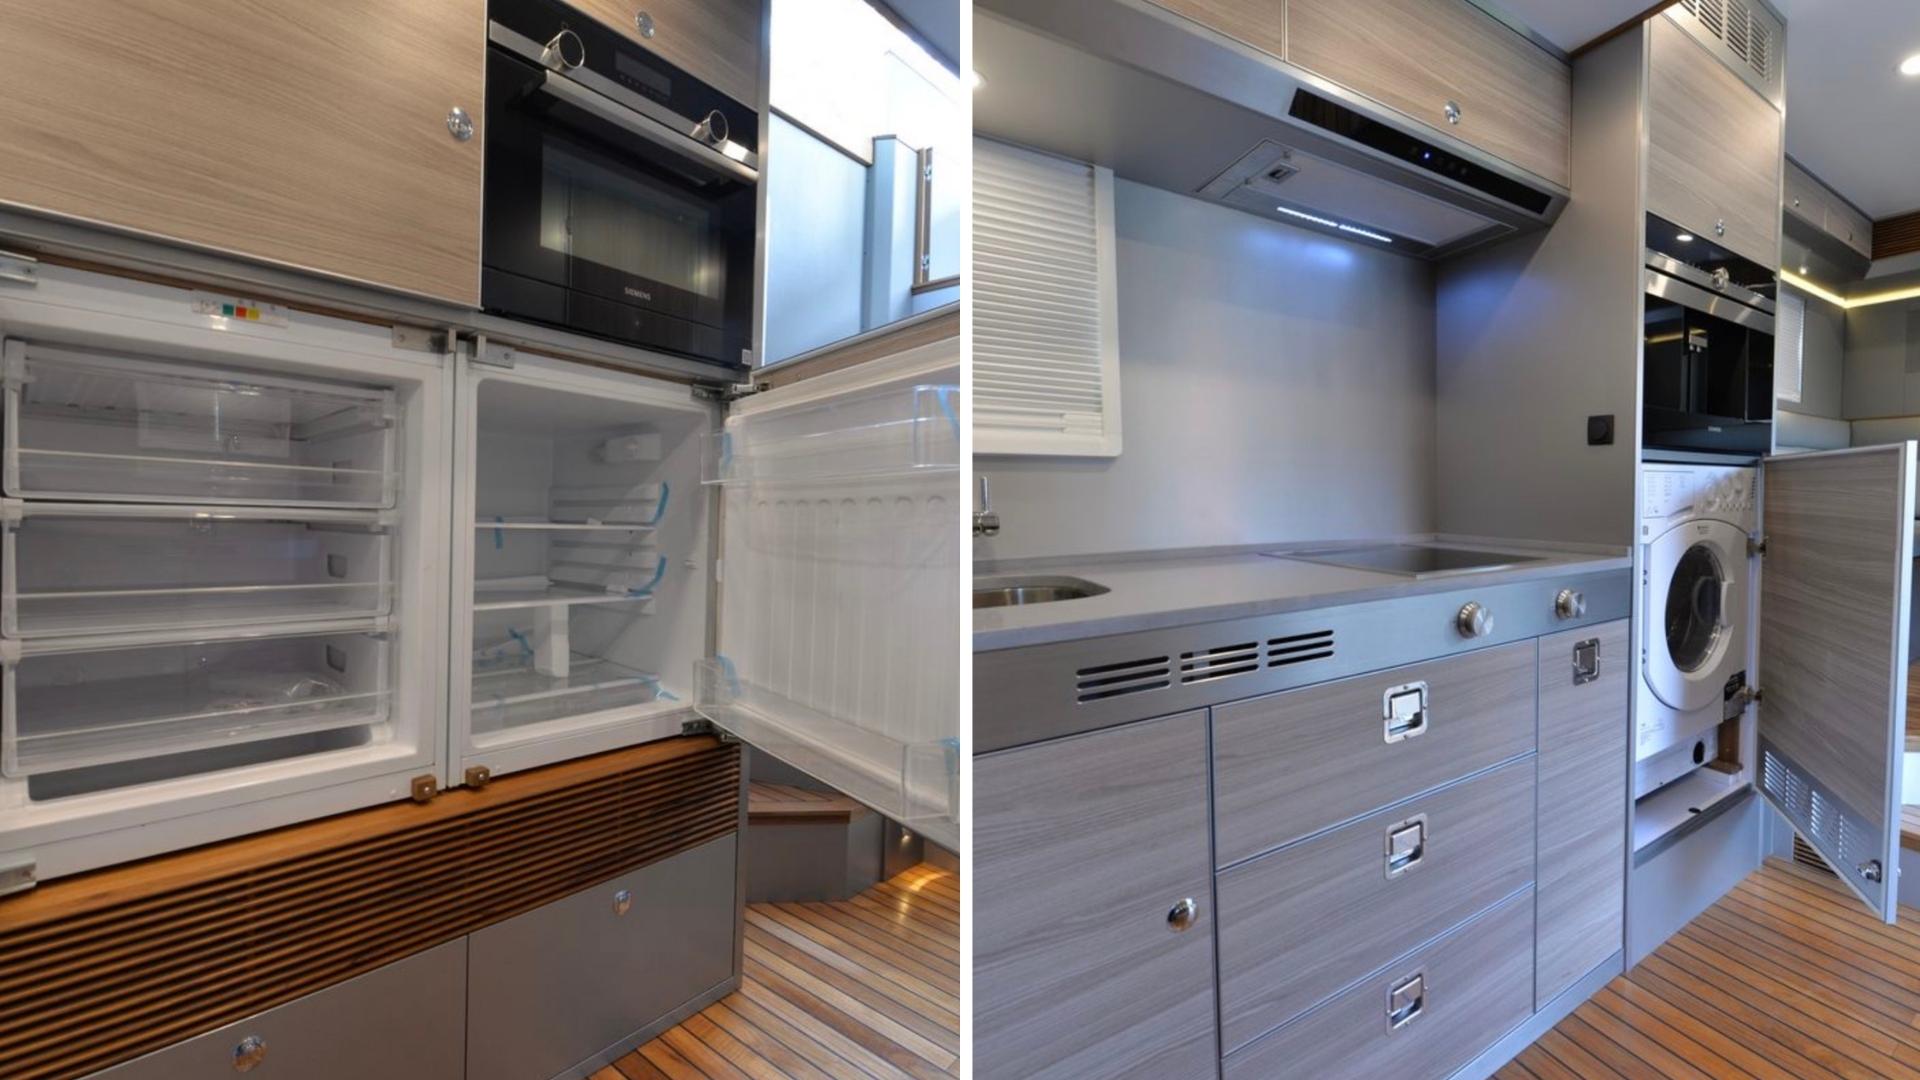 Additional photos of the kitchen amenities of the Armadillo Conquistador F